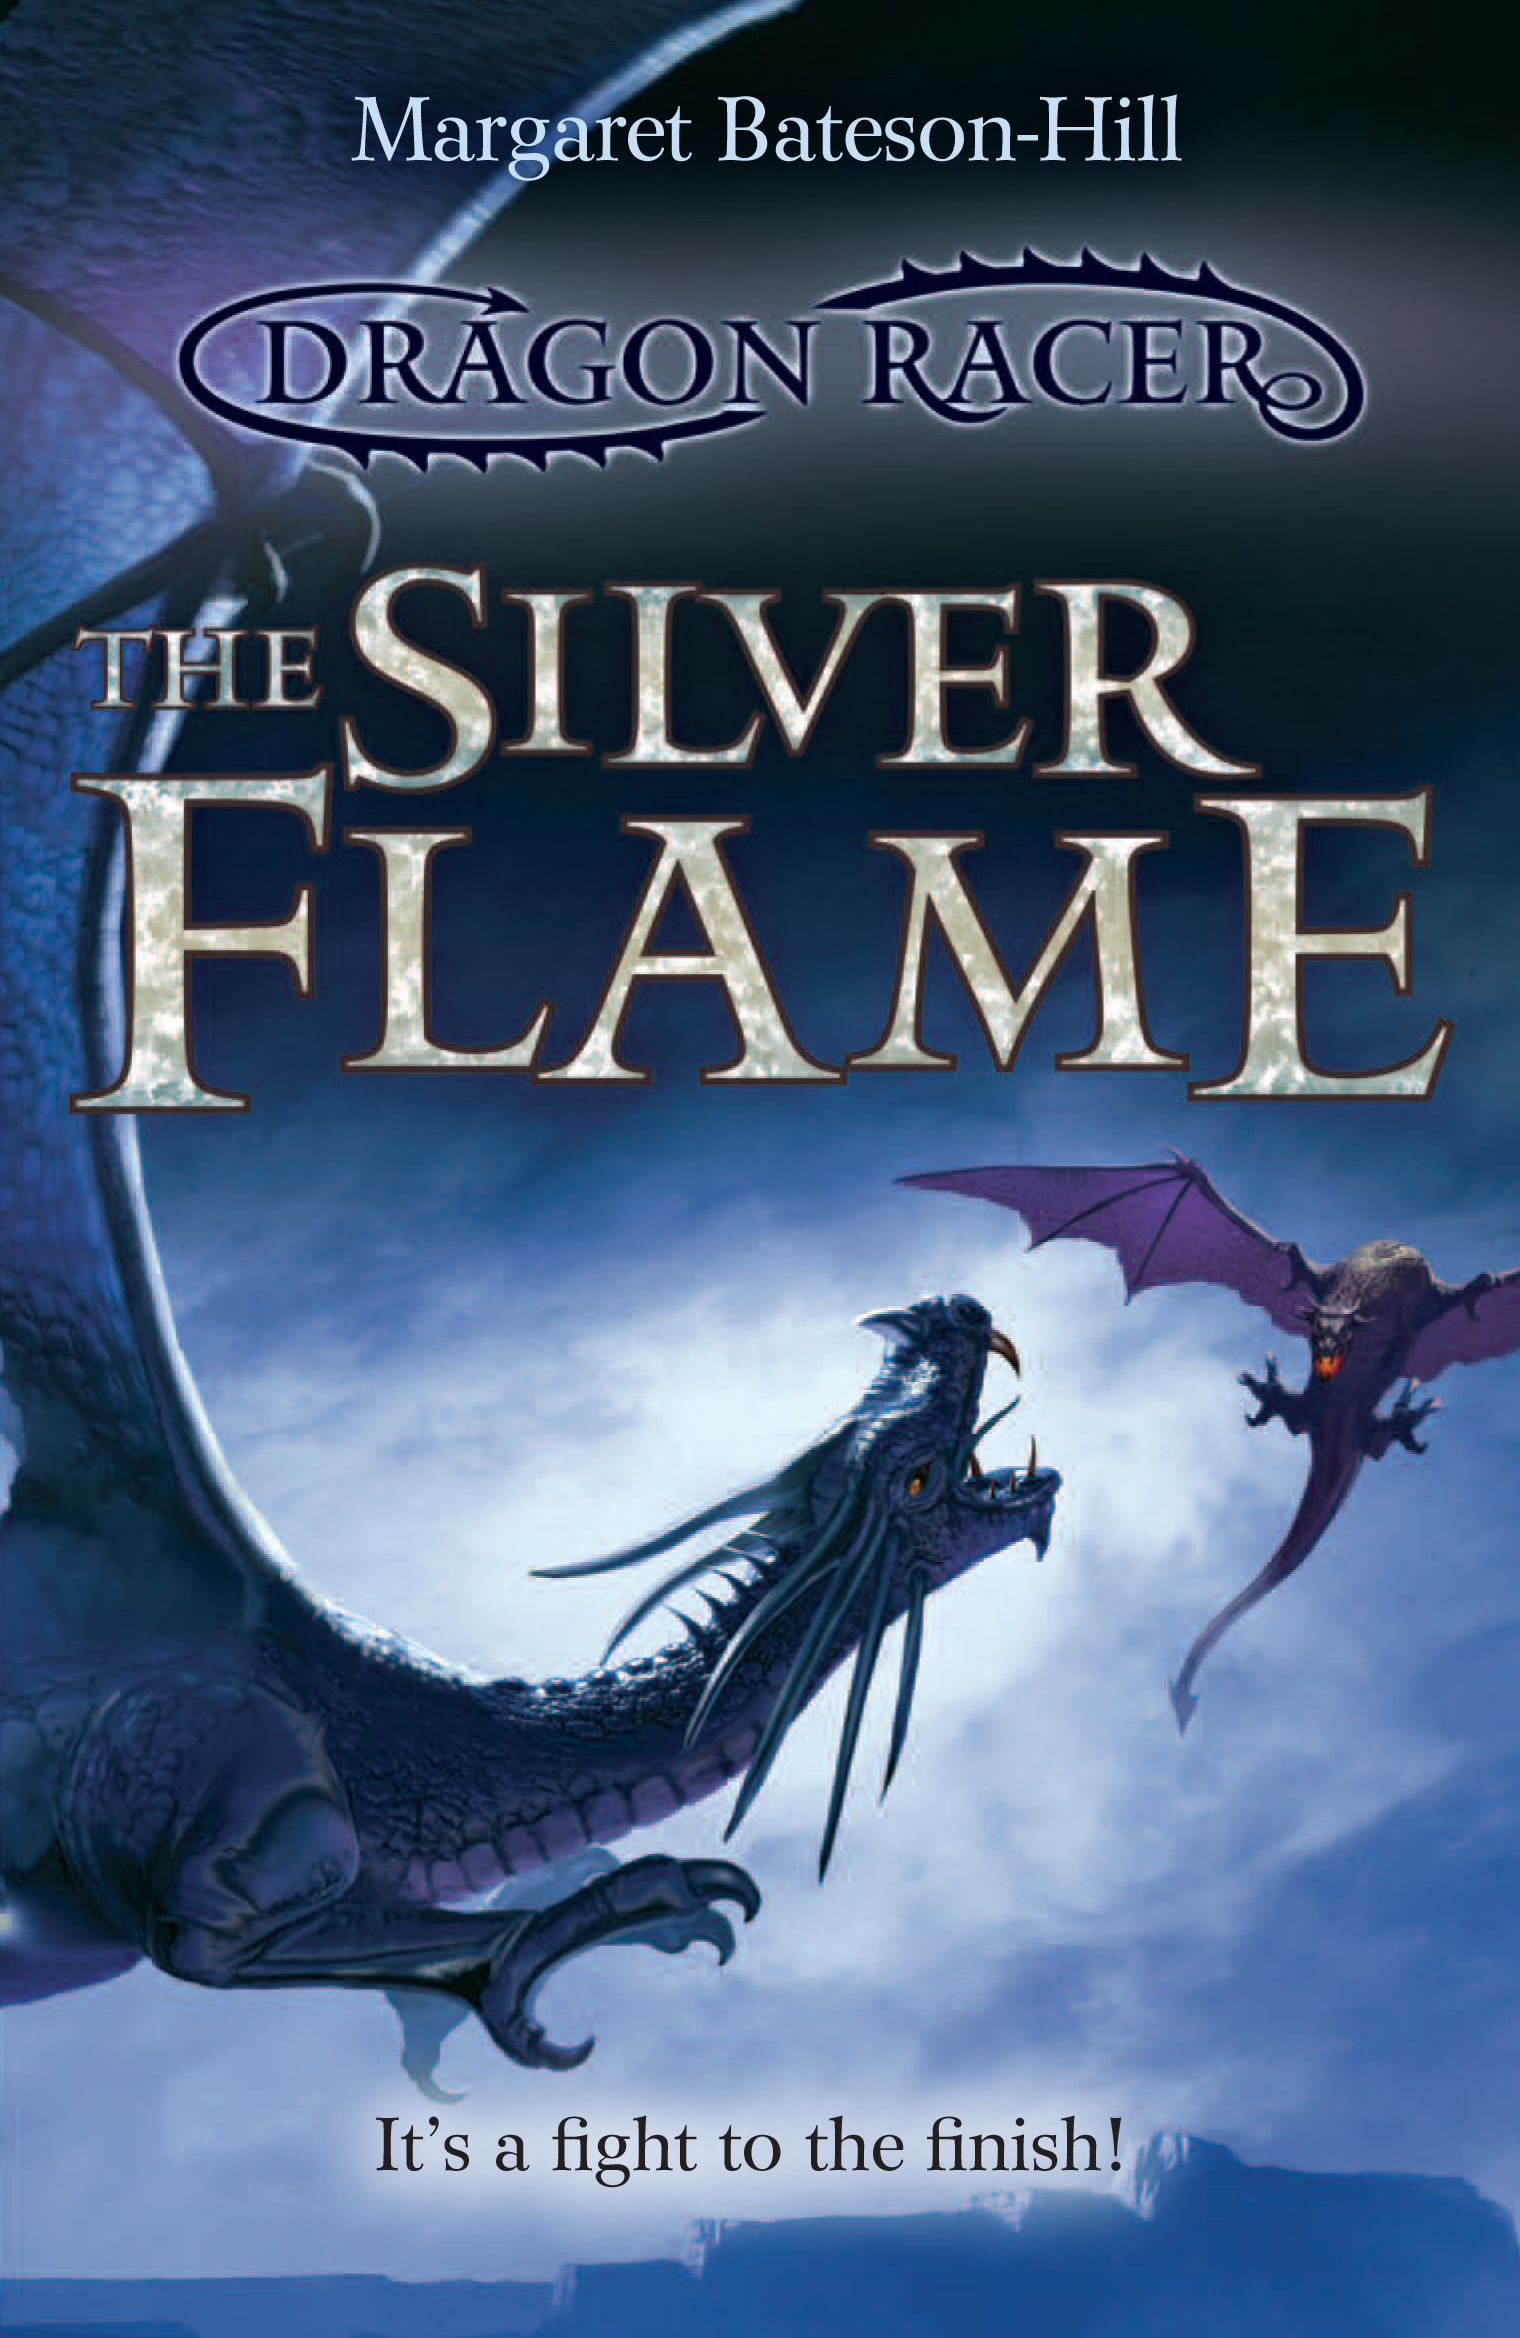 we hunt the flame book 3